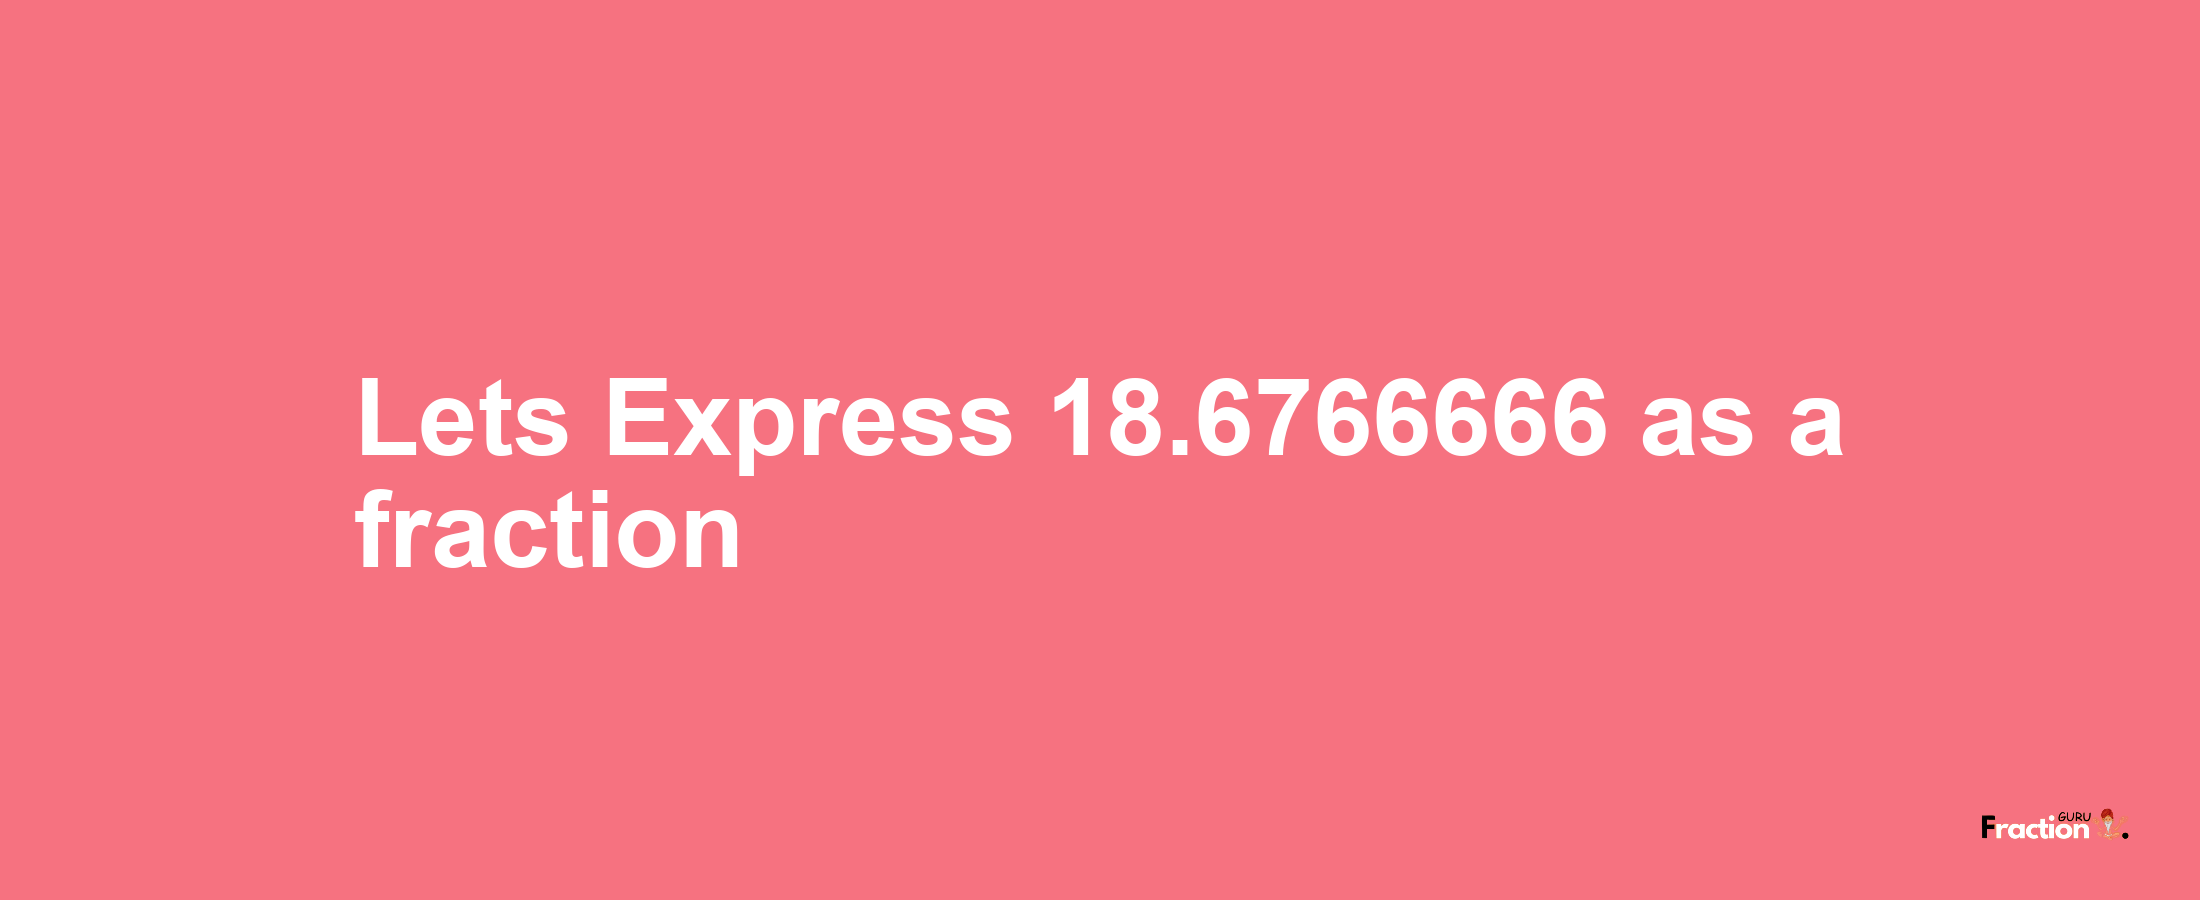 Lets Express 18.6766666 as afraction